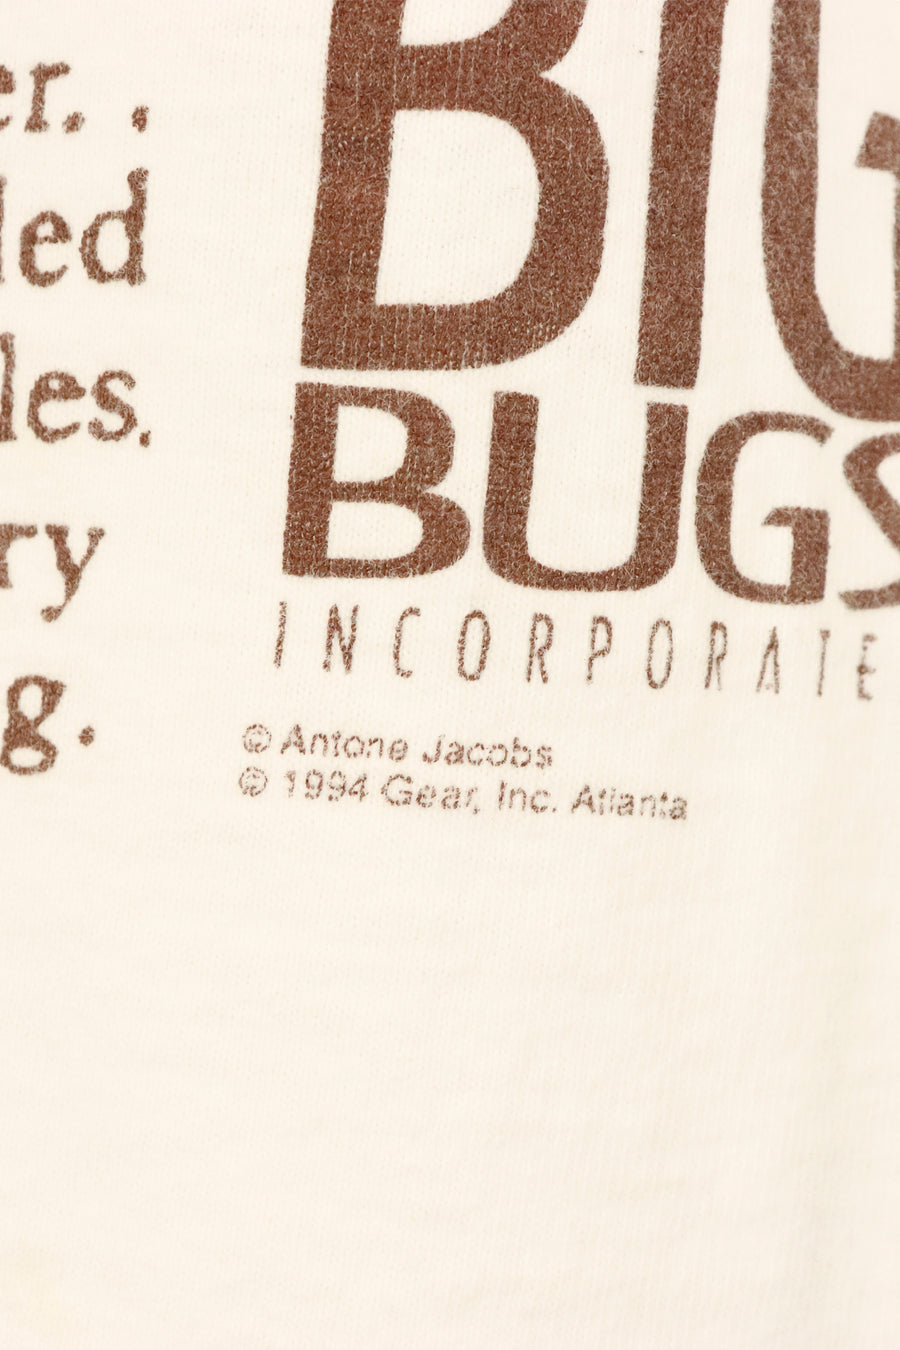 Vintage 1994 Lady Bug Graphic Latin Name And Facts Vinyl T Shirt Sz L